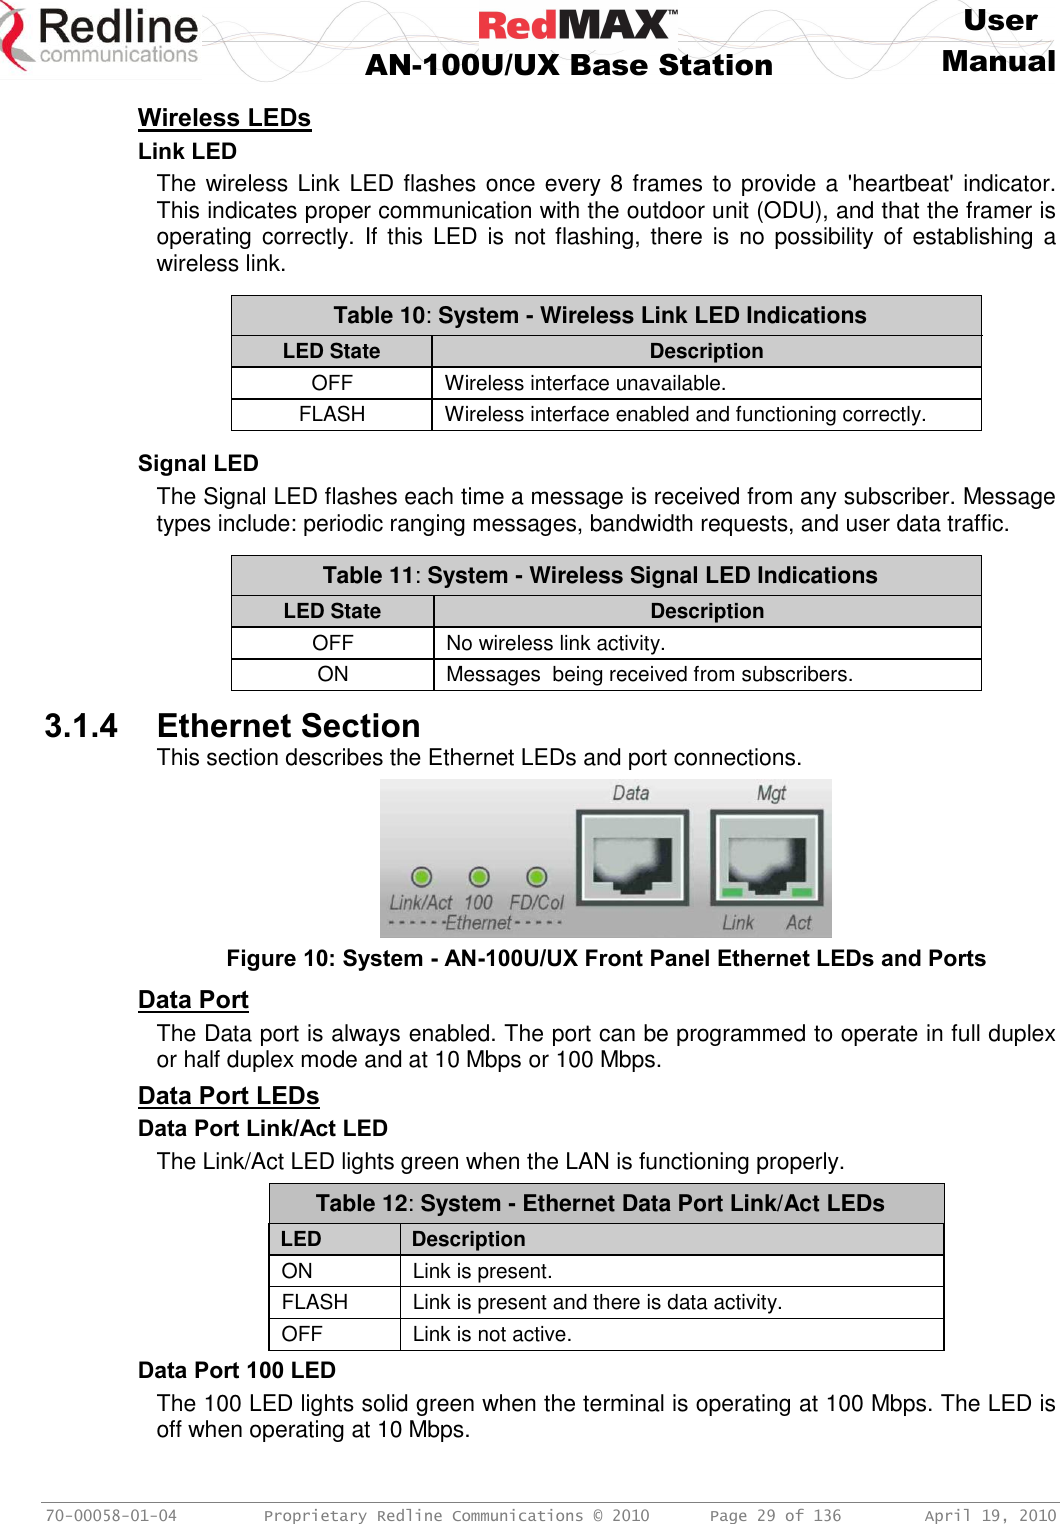     User  AN-100U/UX Base Station Manual   70-00058-01-04  Proprietary Redline Communications © 2010   Page 29 of 136  April 19, 2010 Wireless LEDs Link LED The wireless Link LED flashes once every 8 frames to provide a &apos;heartbeat&apos; indicator. This indicates proper communication with the outdoor unit (ODU), and that the framer is operating correctly. If this LED  is  not  flashing, there is  no possibility of  establishing a wireless link.  Table 10: System - Wireless Link LED Indications LED State Description OFF Wireless interface unavailable. FLASH Wireless interface enabled and functioning correctly.     Signal LED The Signal LED flashes each time a message is received from any subscriber. Message types include: periodic ranging messages, bandwidth requests, and user data traffic.  Table 11: System - Wireless Signal LED Indications LED State Description OFF No wireless link activity. ON Messages  being received from subscribers.  3.1.4 Ethernet Section This section describes the Ethernet LEDs and port connections.  Figure 10: System - AN-100U/UX Front Panel Ethernet LEDs and Ports Data Port The Data port is always enabled. The port can be programmed to operate in full duplex or half duplex mode and at 10 Mbps or 100 Mbps. Data Port LEDs Data Port Link/Act LED The Link/Act LED lights green when the LAN is functioning properly. Table 12: System - Ethernet Data Port Link/Act LEDs  LED Description ON Link is present. FLASH Link is present and there is data activity. OFF Link is not active. Data Port 100 LED The 100 LED lights solid green when the terminal is operating at 100 Mbps. The LED is off when operating at 10 Mbps.   